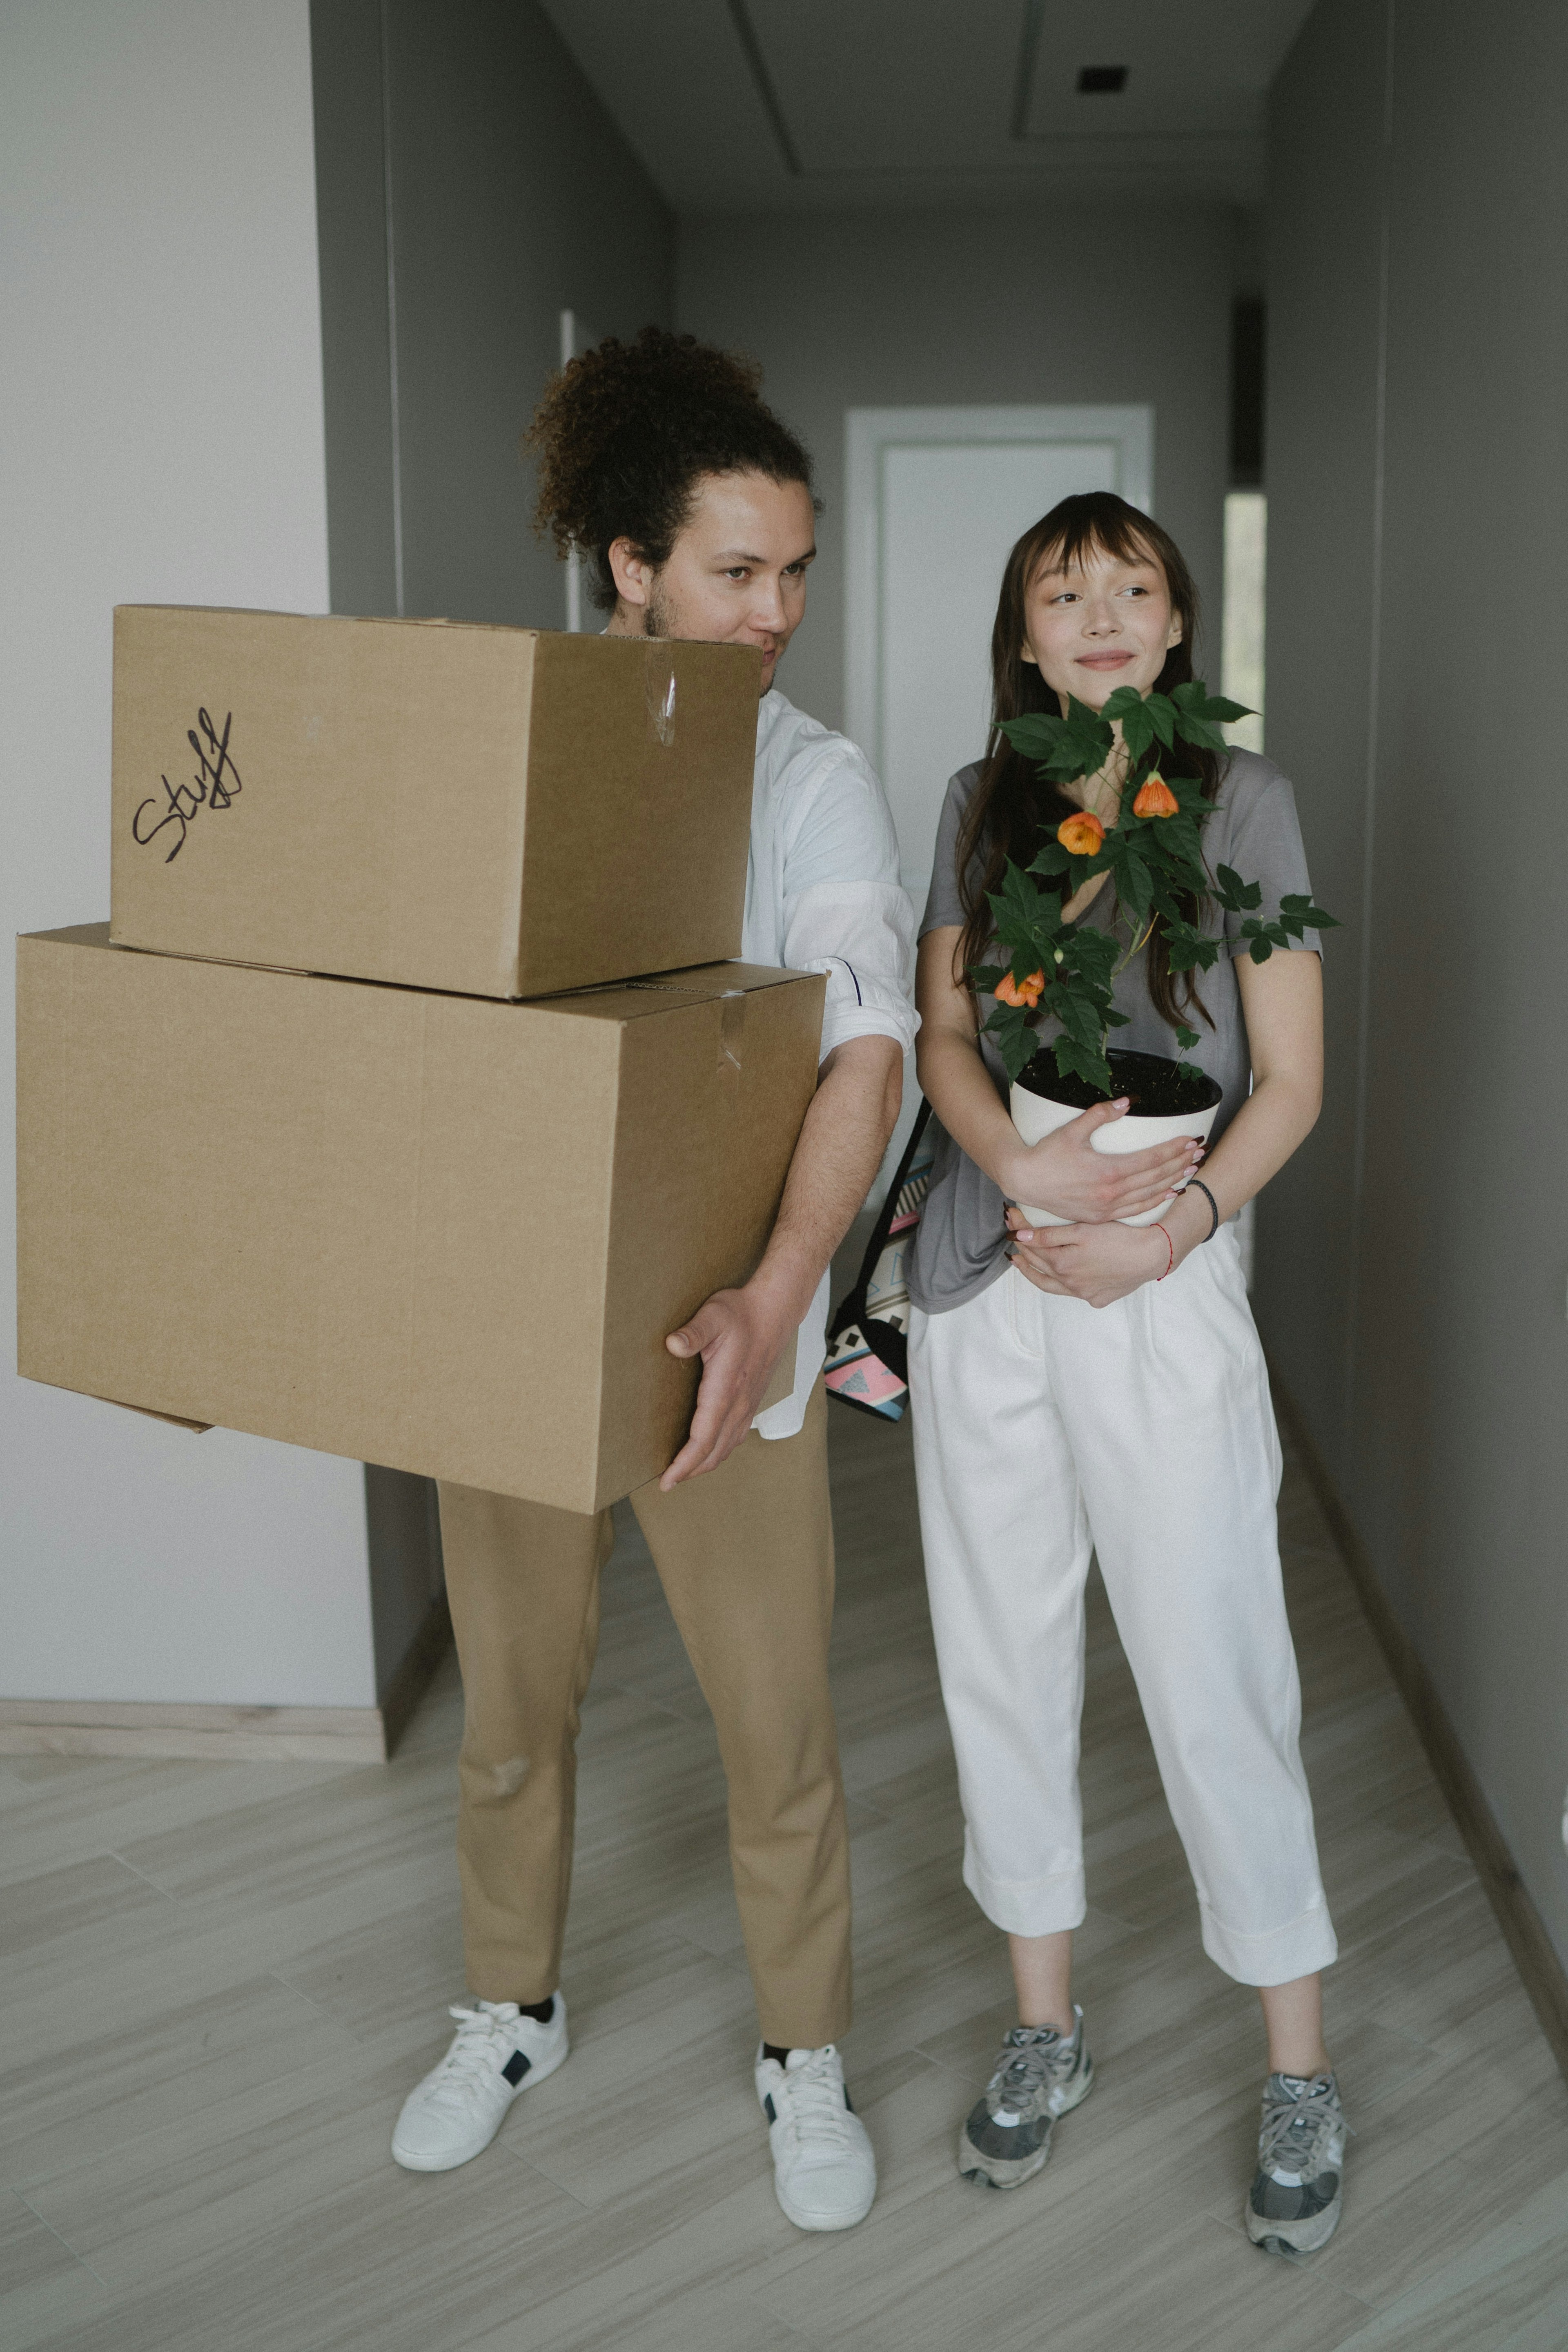 Two homebuyers moving in to a house